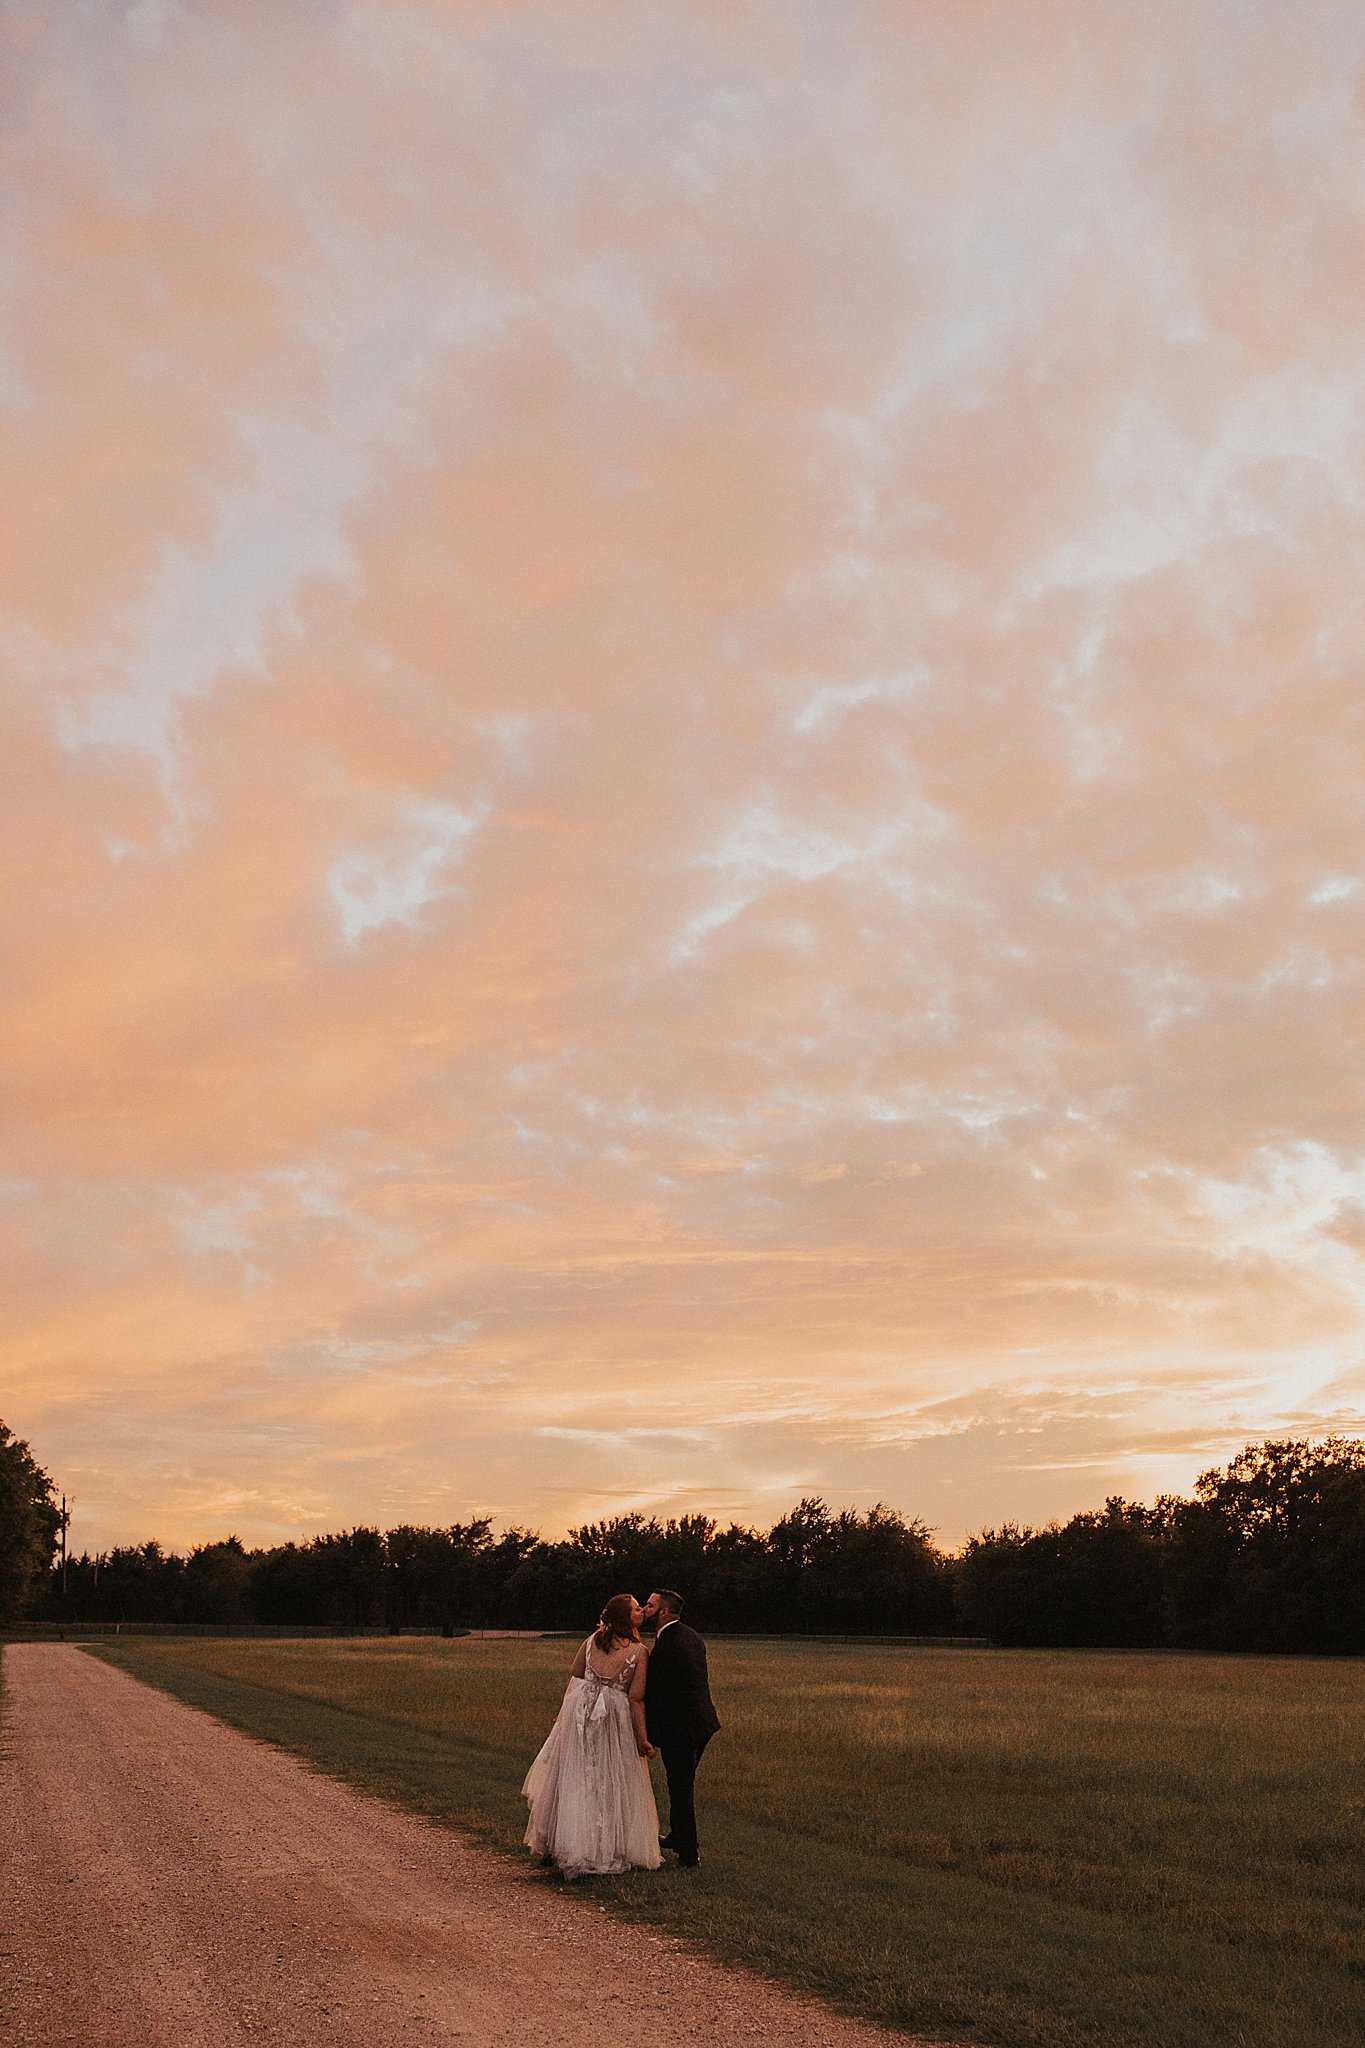 This was a gorgeous fall day at the Emerson wedding venue in Dallas, TX.